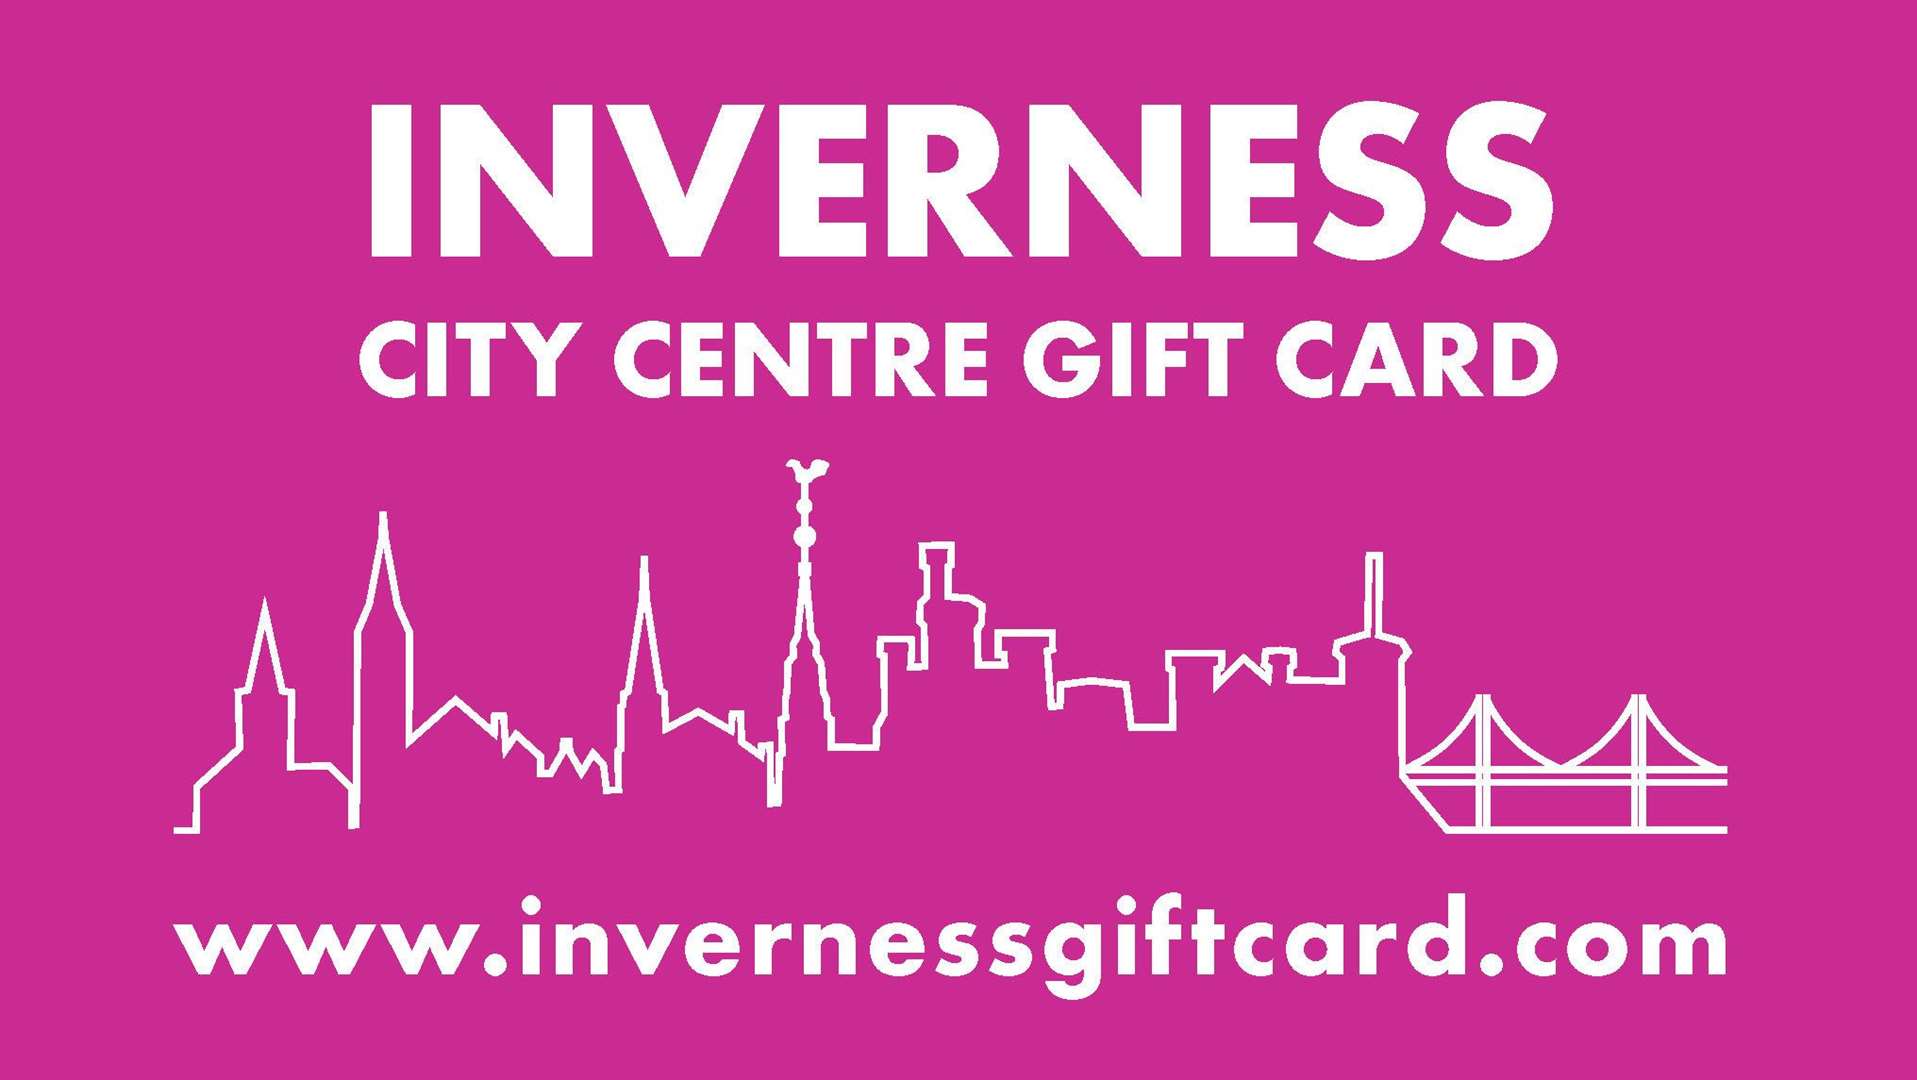 Inverness City Centre Gift Card.